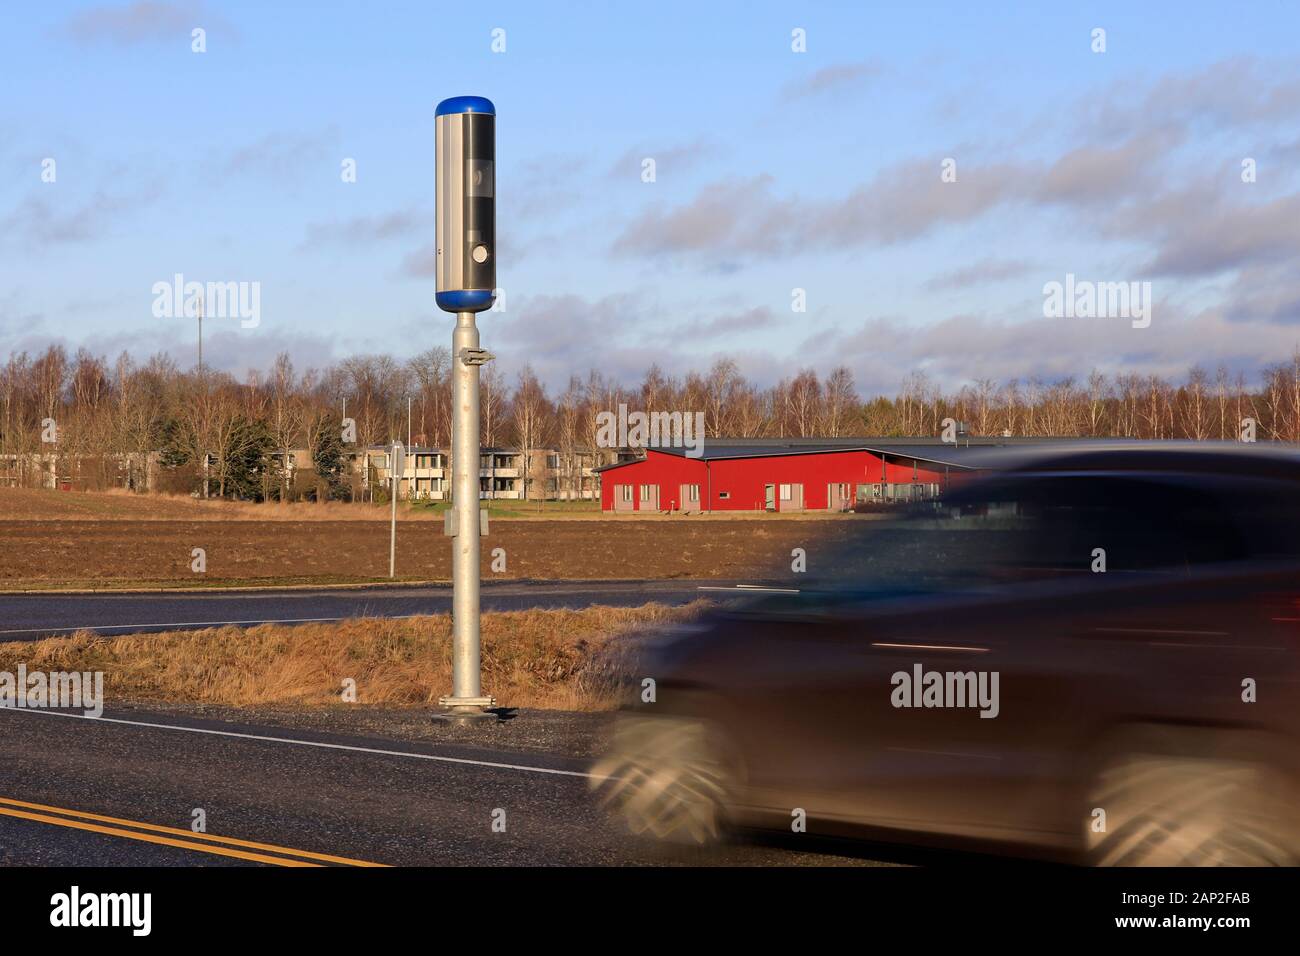 Car approaching a roadside speed camera on a sunny day of winter. Long exposure to blur the vehicle. Stock Photo